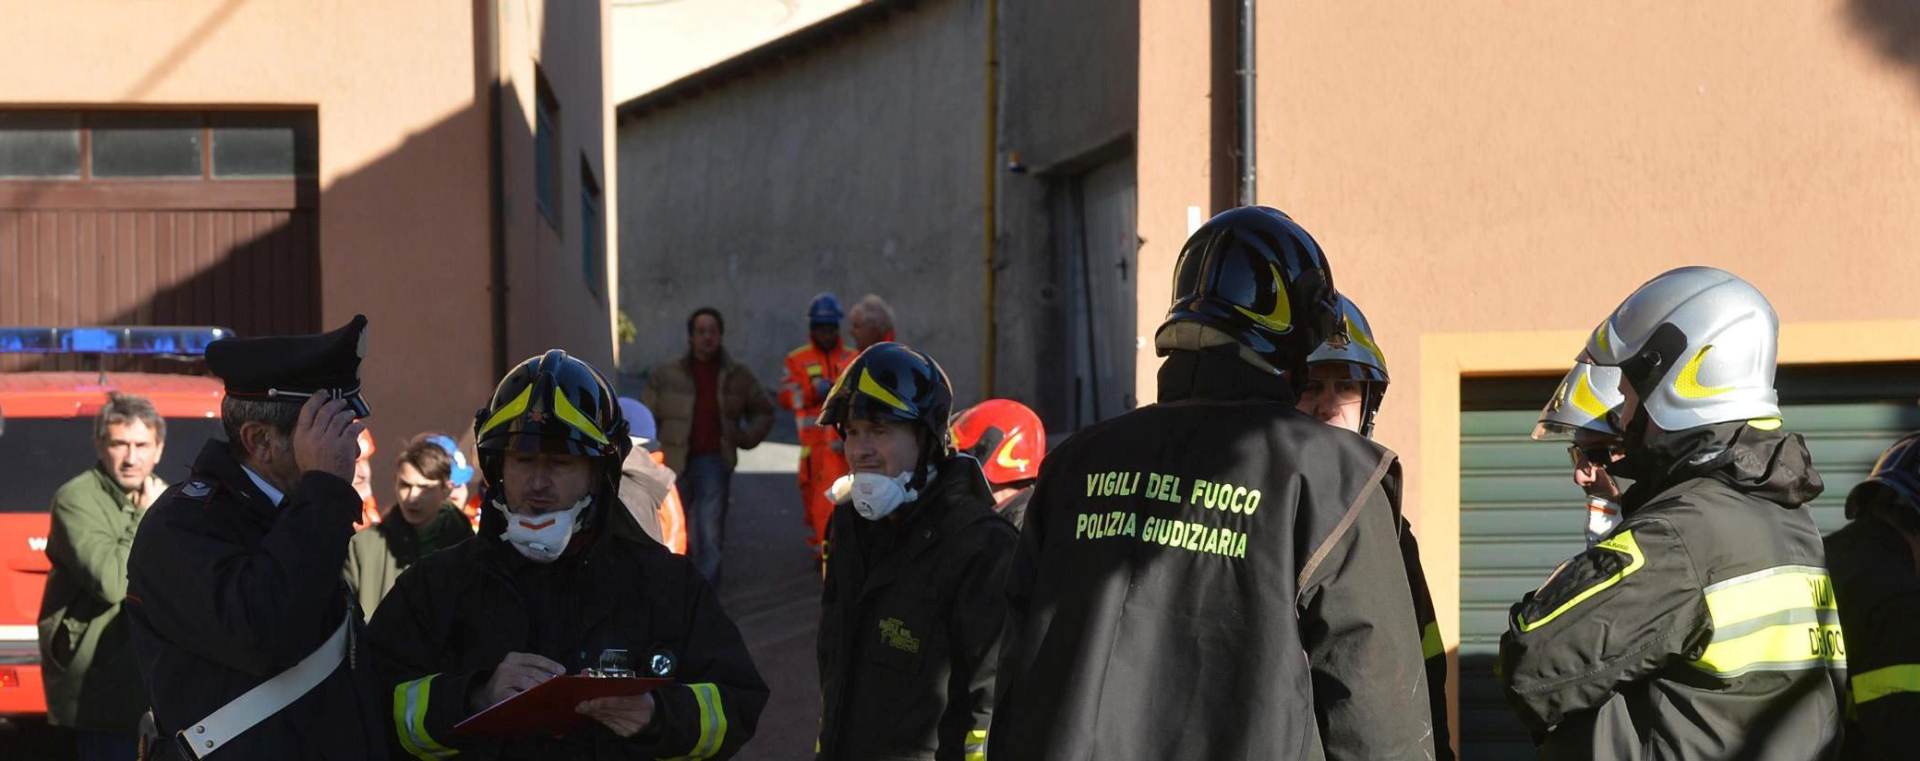 epa05104598 Rescuers at work in the area of a collapsed building in Arnasco, near Savona, Italy, 16 January 2016. According to Italian media reports, the collapse claimed five lives and was down to a gas leak.  EPA/LUCA ZENNARO